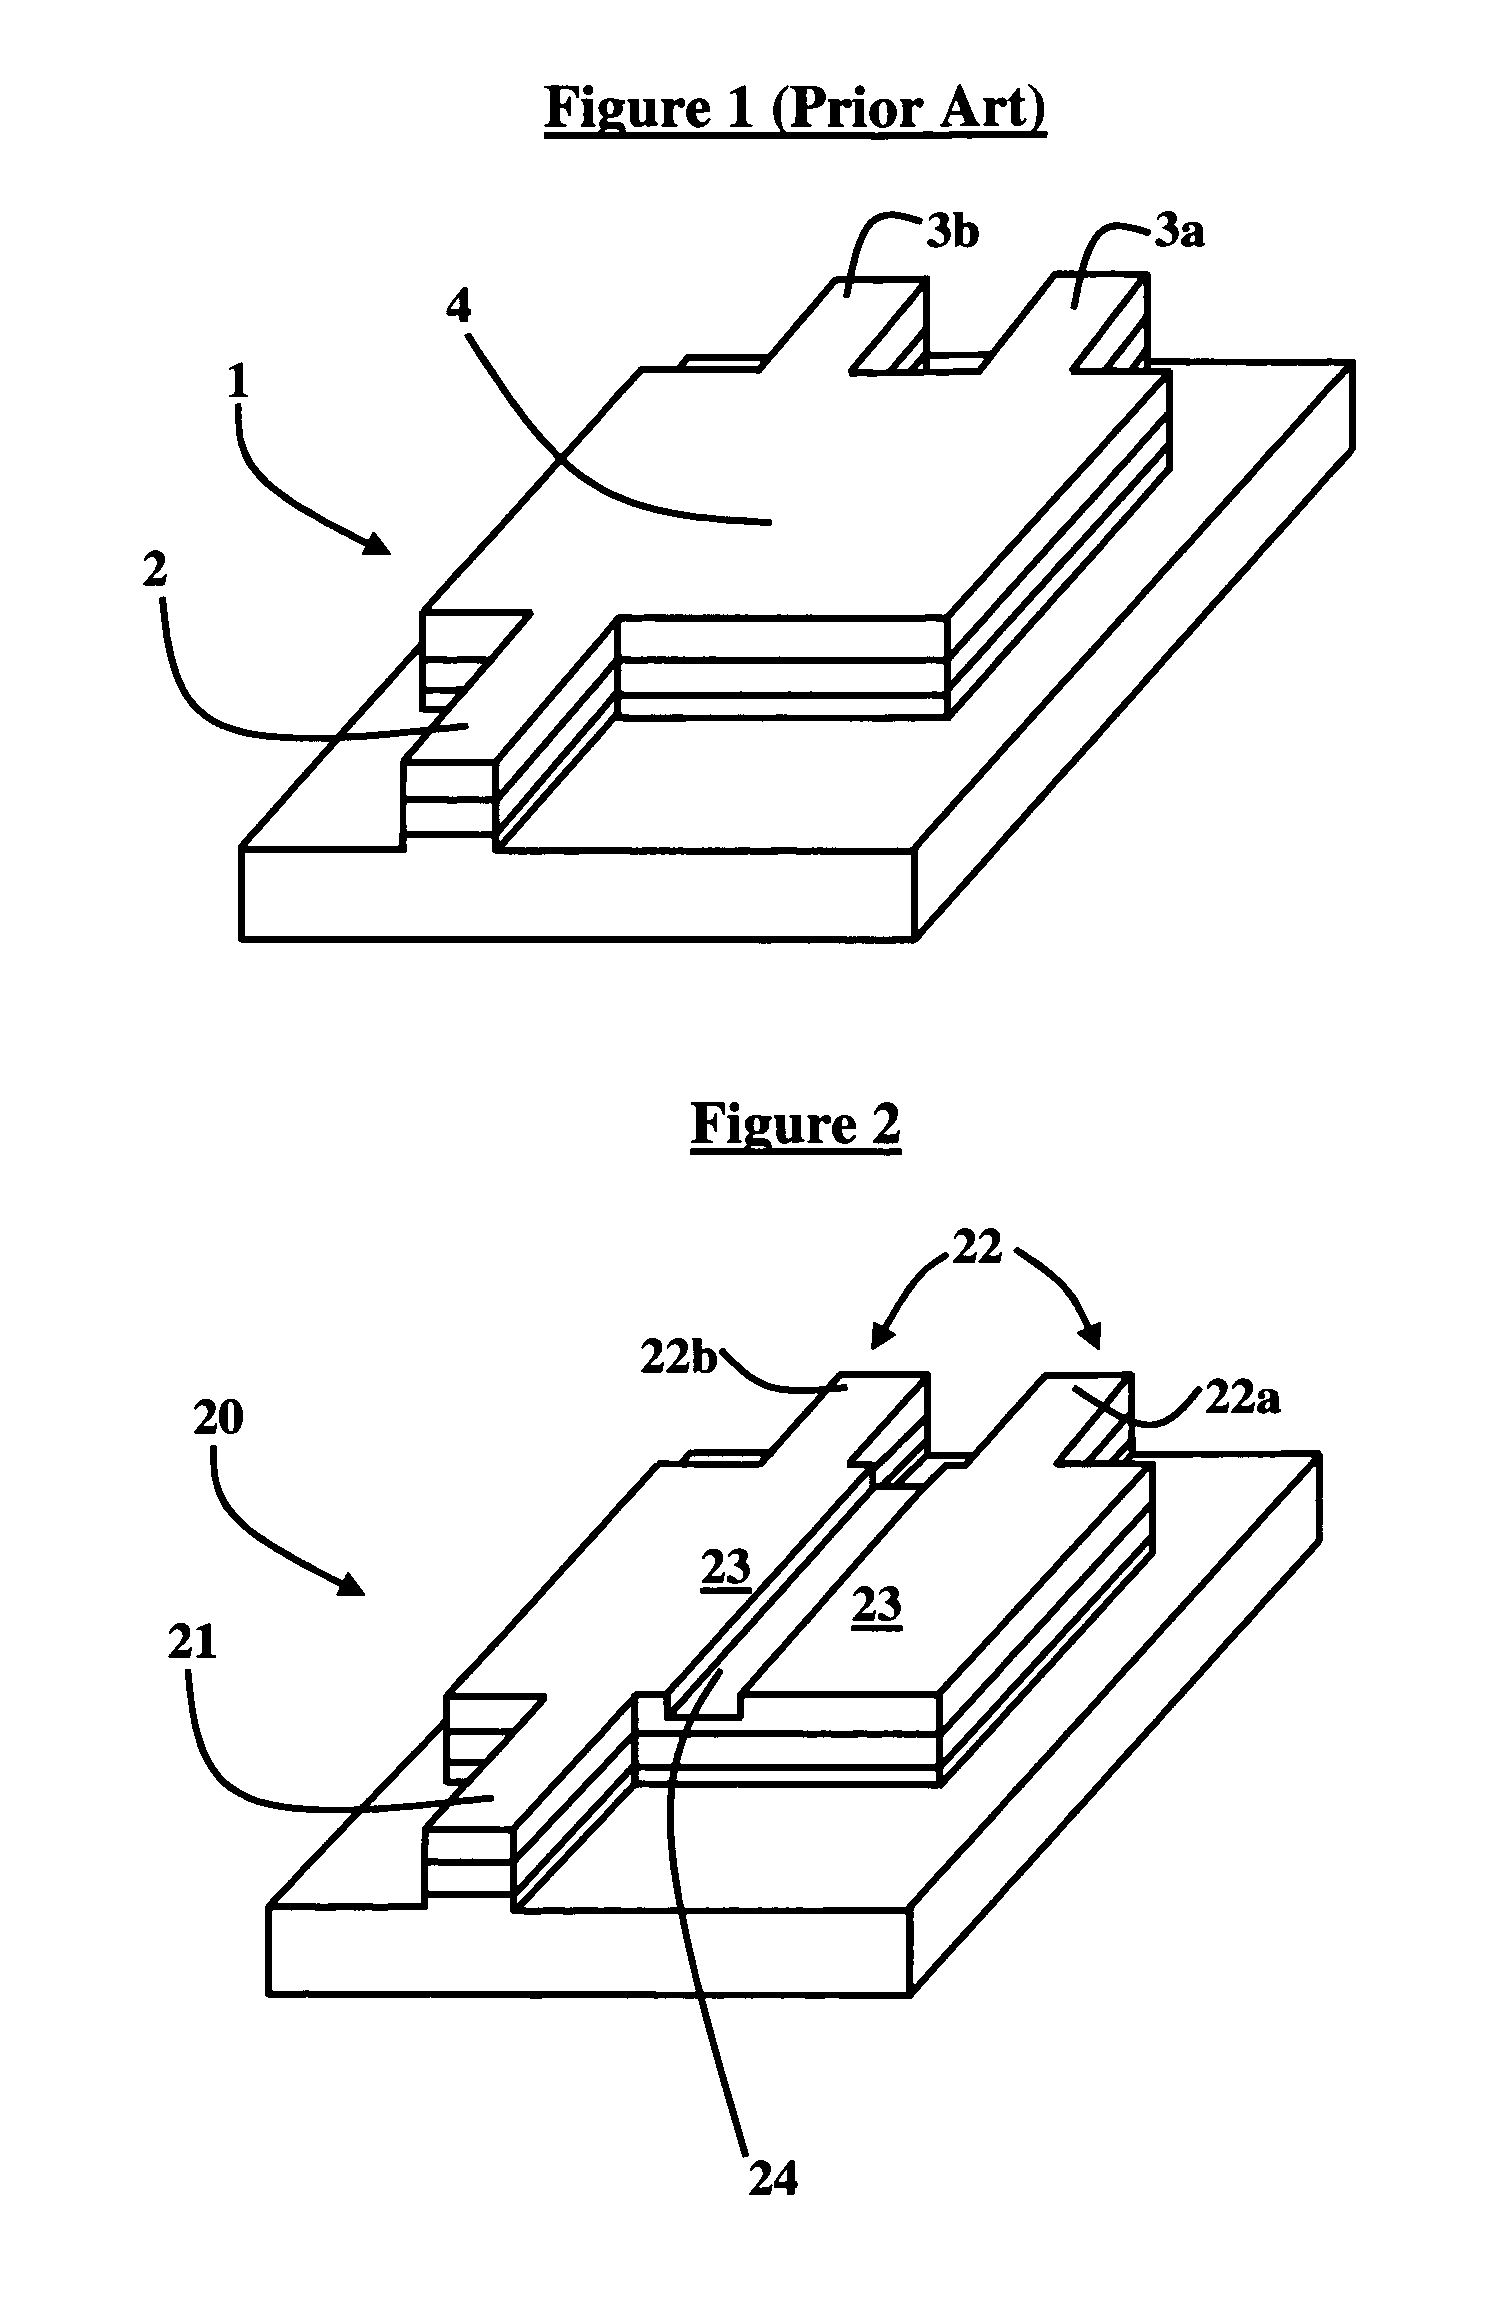 Slotted multimode interference device